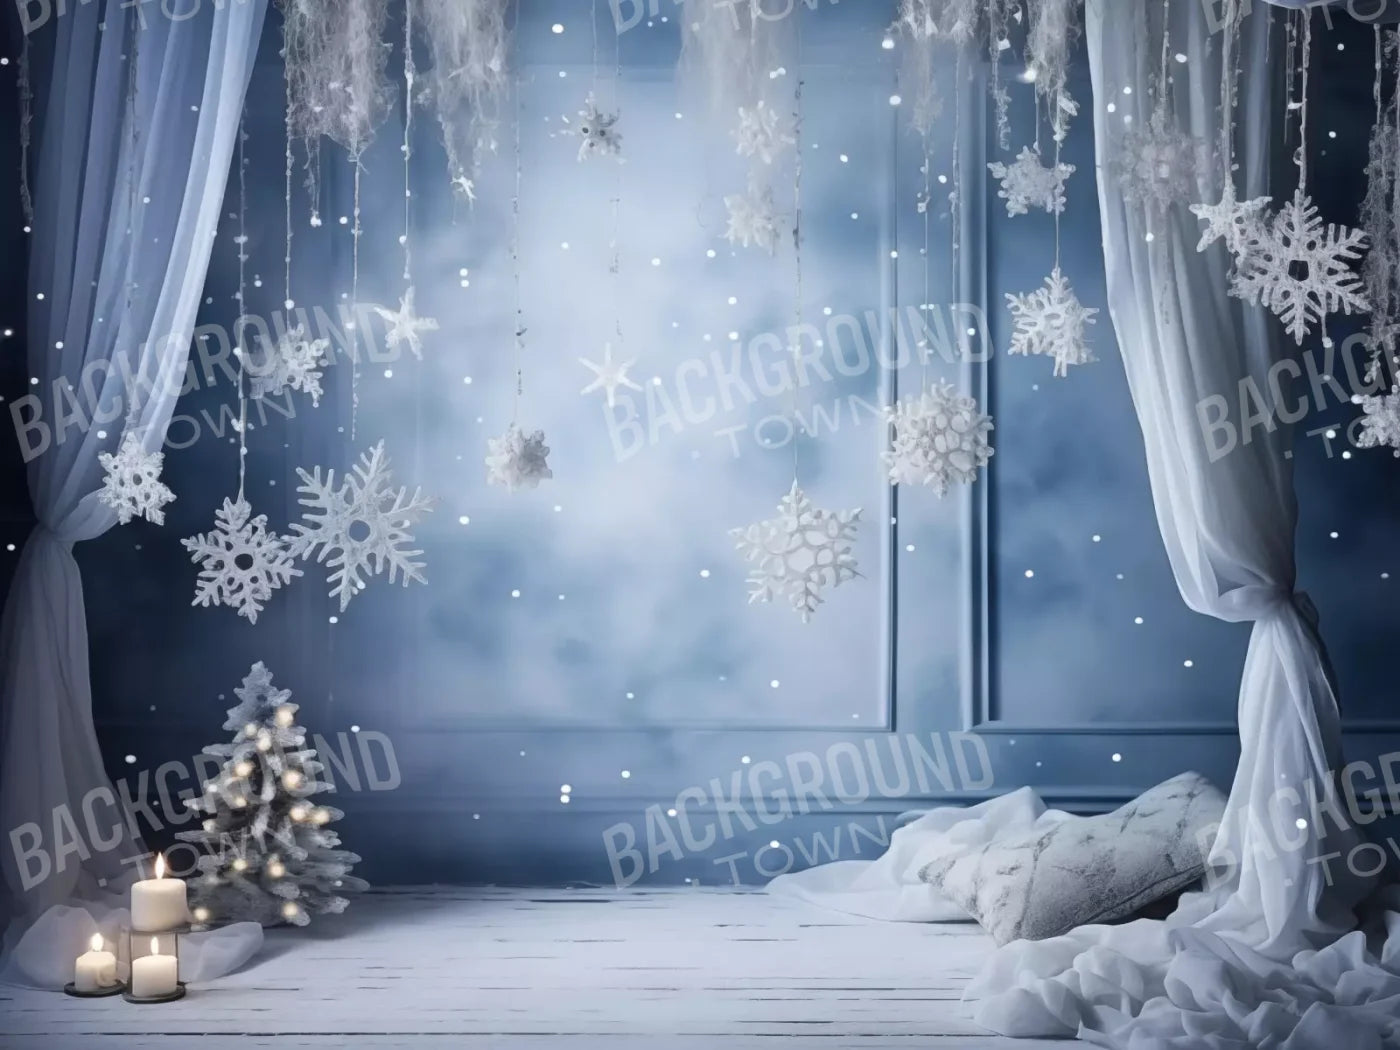 Blue And White Christmas 8X6 Fleece ( 96 X 72 Inch ) Backdrop